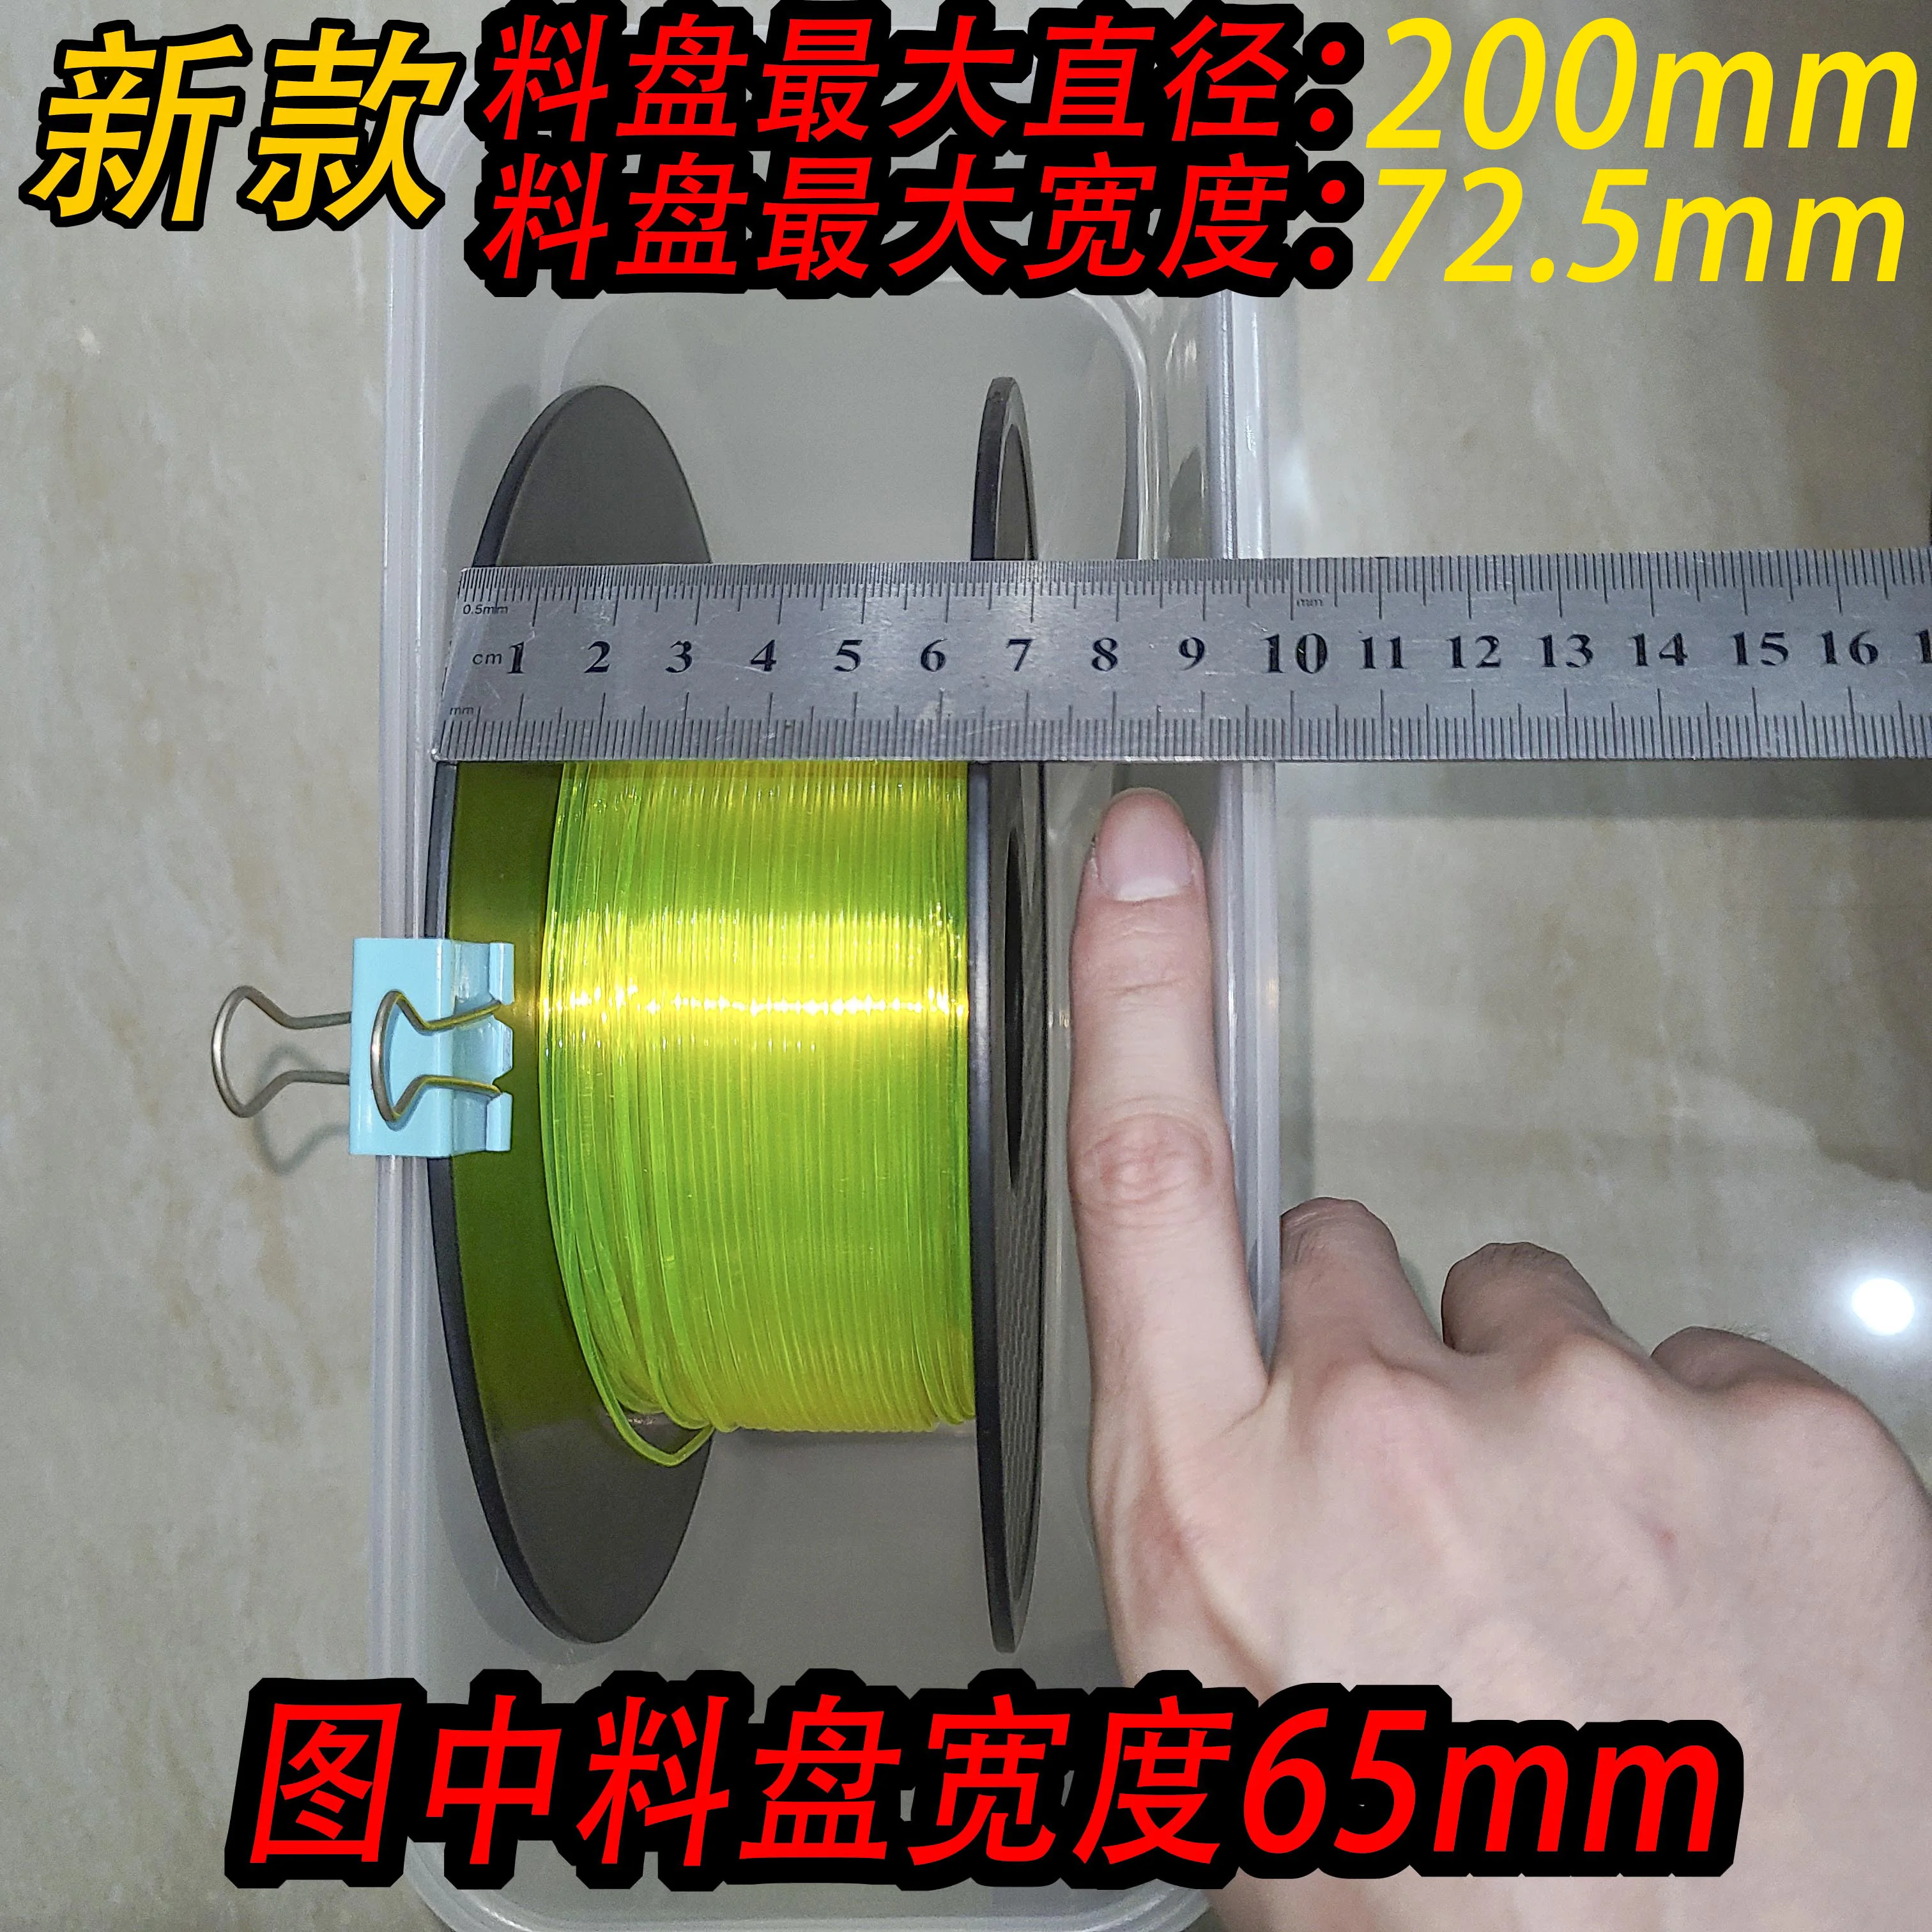 【PODTIG】3D printing consumables drying box, pla, abs, moisture-proof box